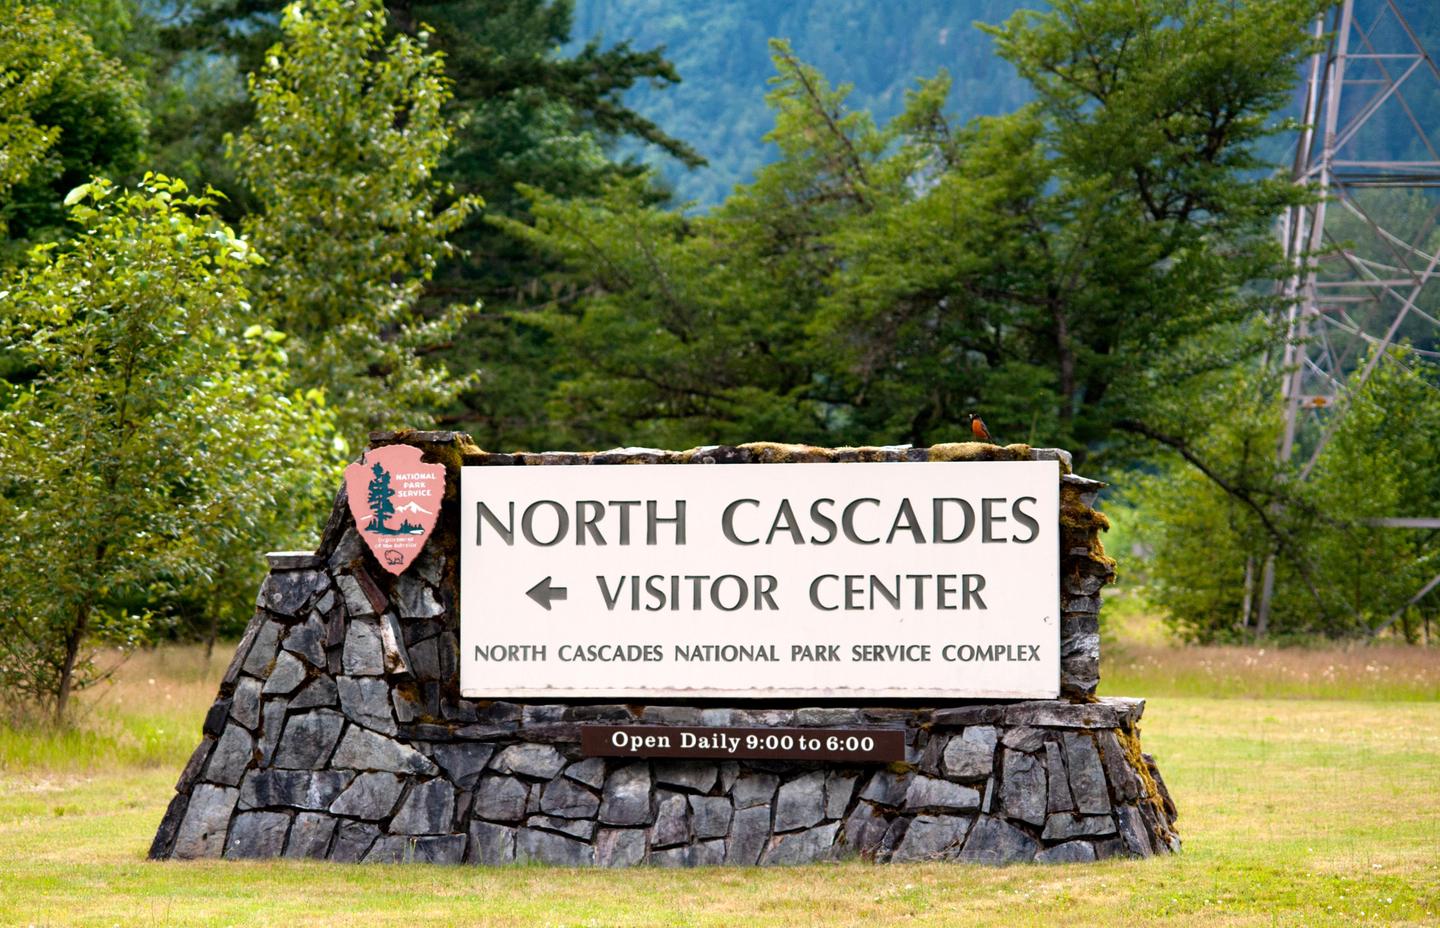 NCVCVisit the North Cascades Visitor Center to learn about the park complex and plan your visit.